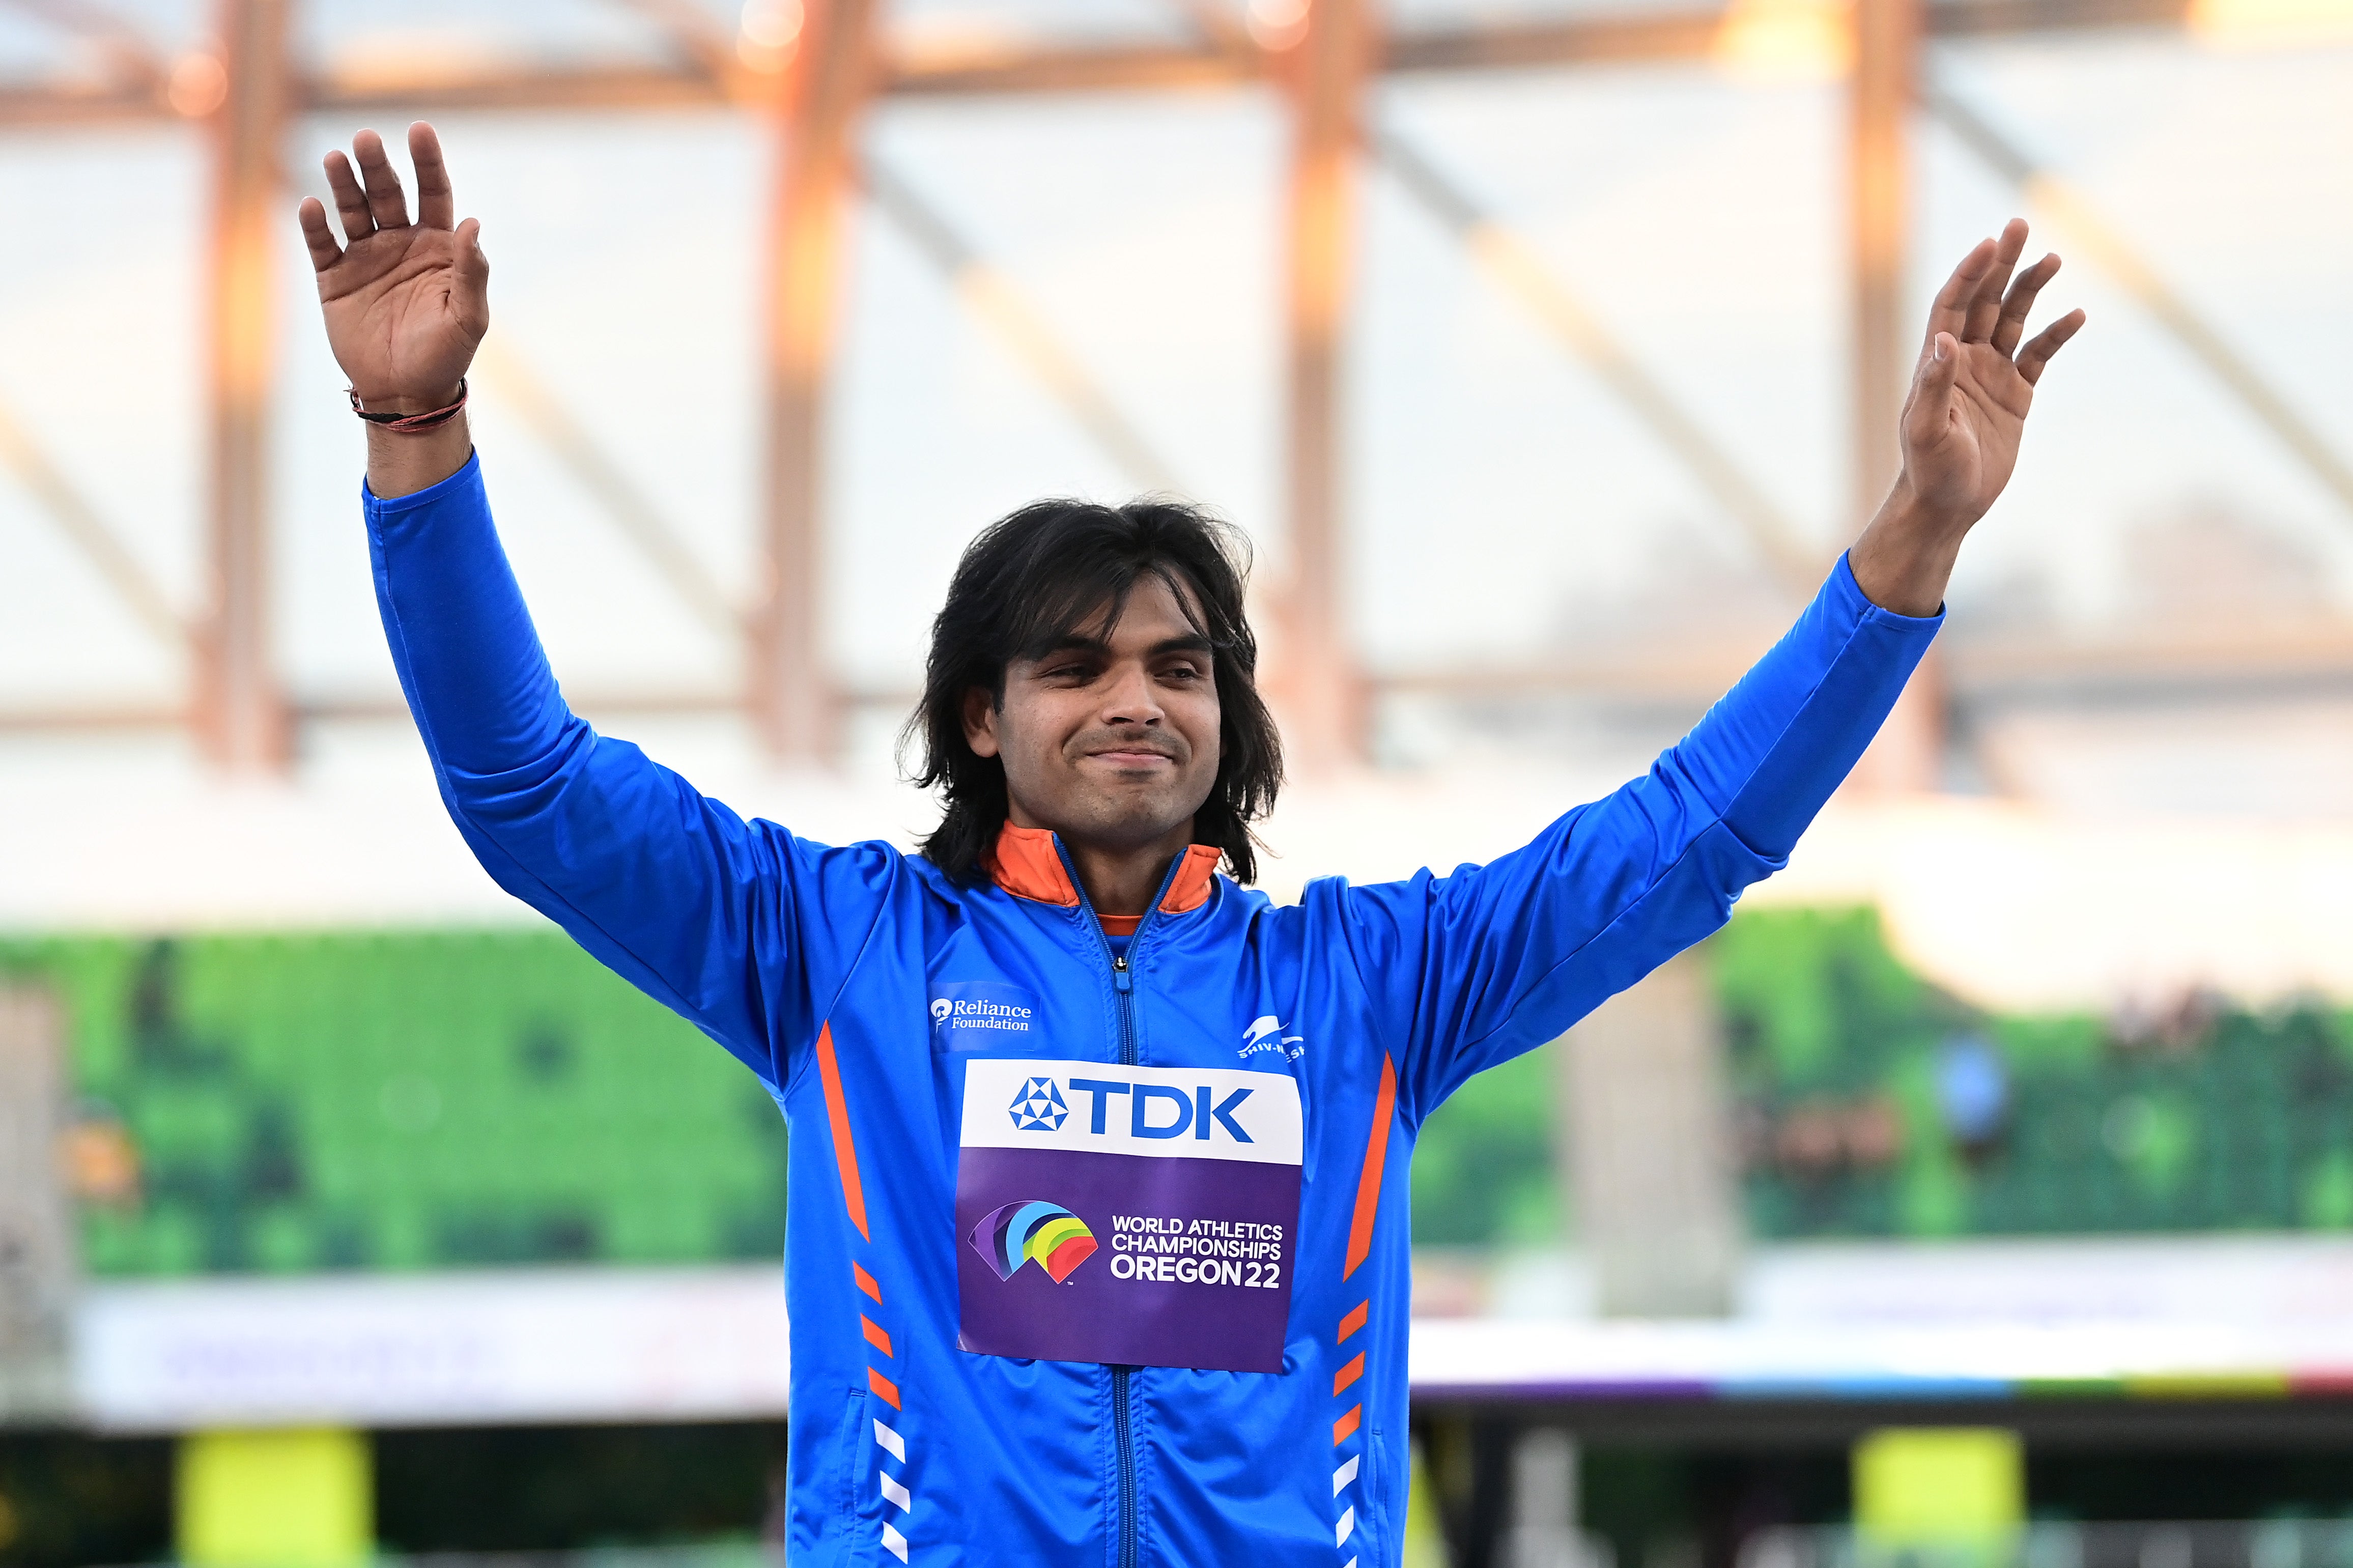 Silver medalist Neeraj Chopra of Team India poses during the medal ceremony for the Men’s Javelin Final on day nine of the World Athletics Championships Oregon22 at Hayward Field in Eugene, Oregon